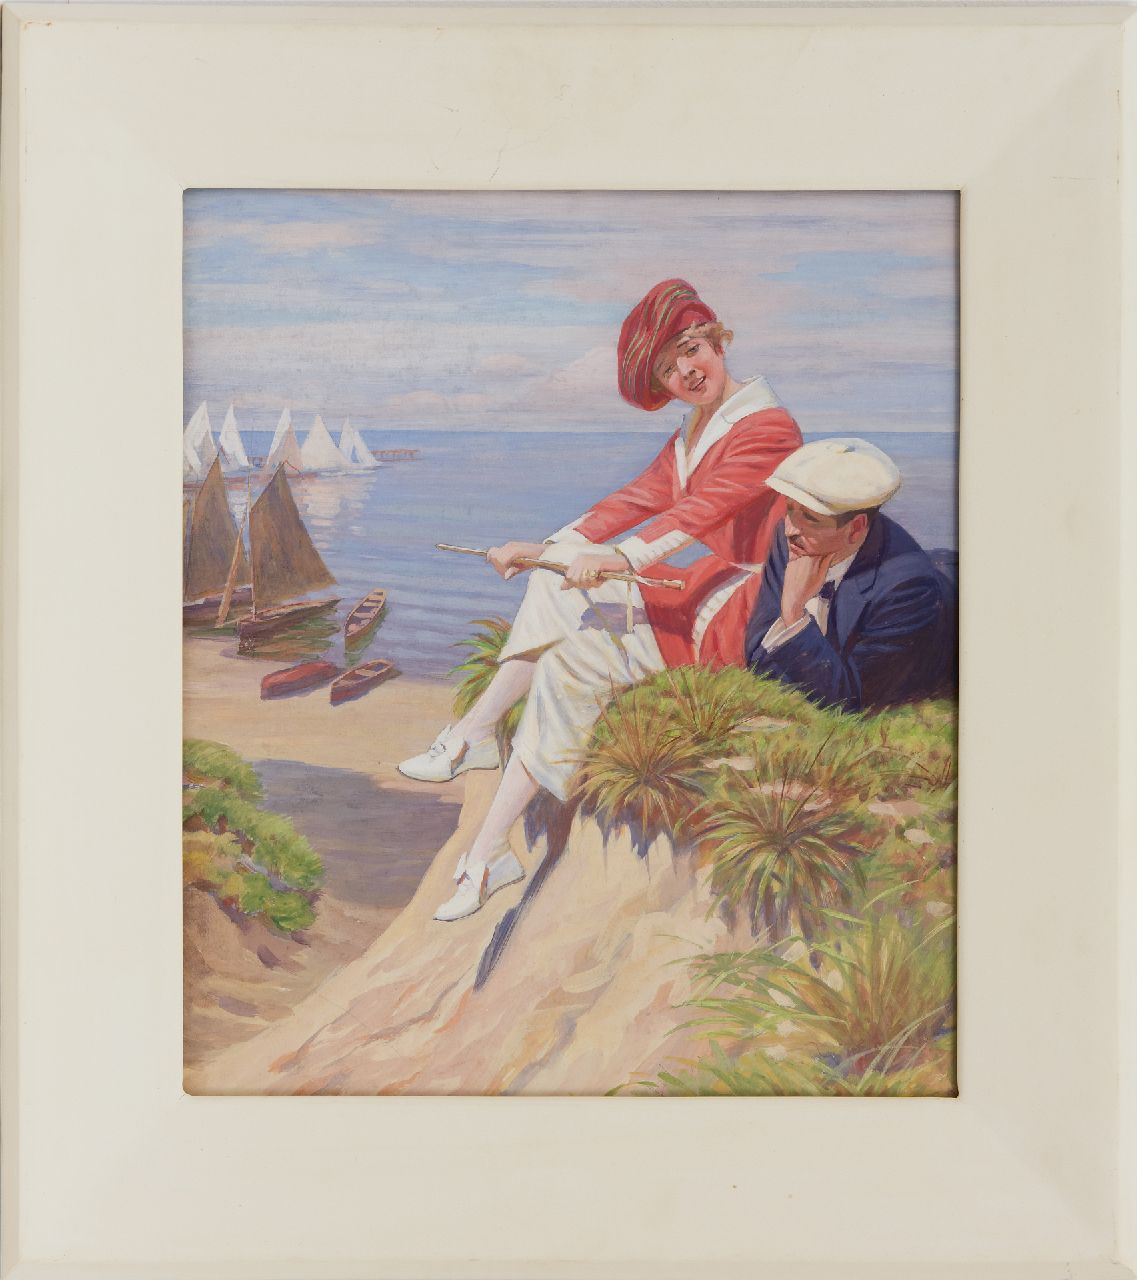 Köhler W.  | Walter Köhler | Watercolours and drawings offered for sale | On the beach, gouache on paper 39.6 x 34.0 cm, painted ca. 1921